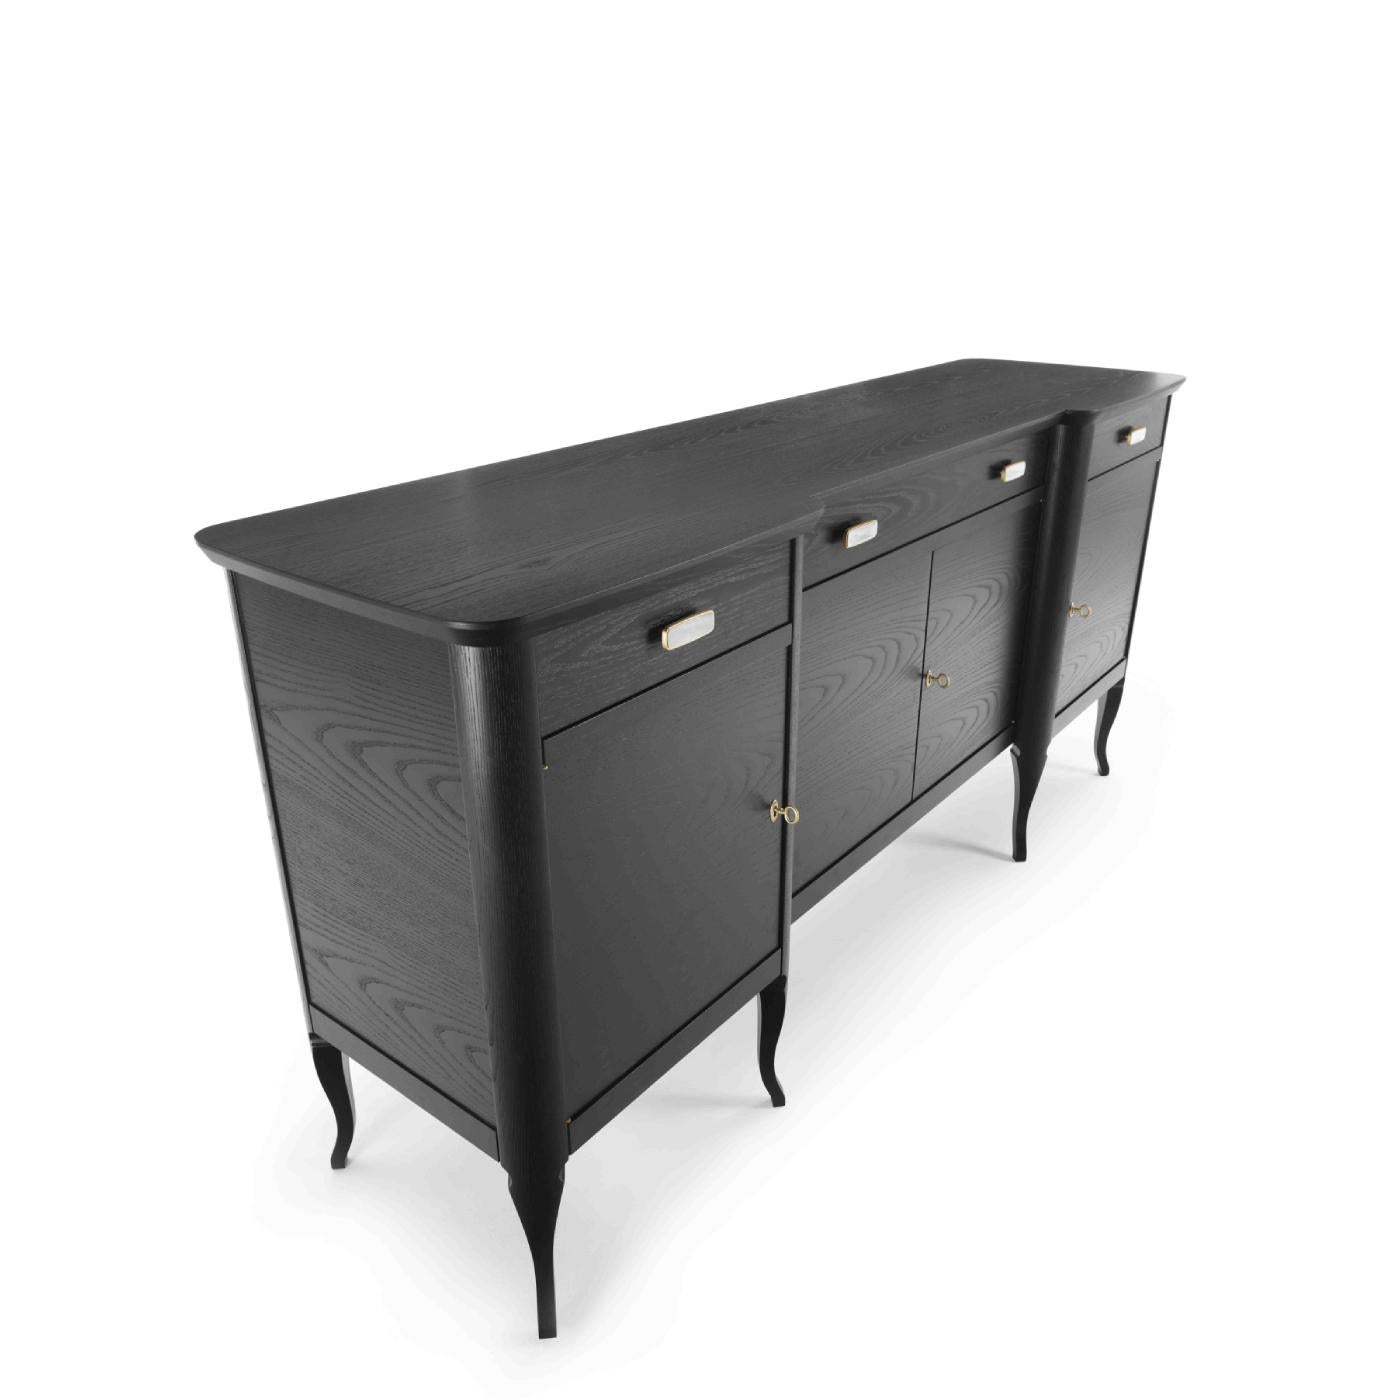 Revisiting a midcentury silhouette with modern sensibility, this refined sideboard is characterized by a sleek design that exudes timeless elegance and formal balance. A dark, ebonized finish adorns the ash-veneered frame that has four doors